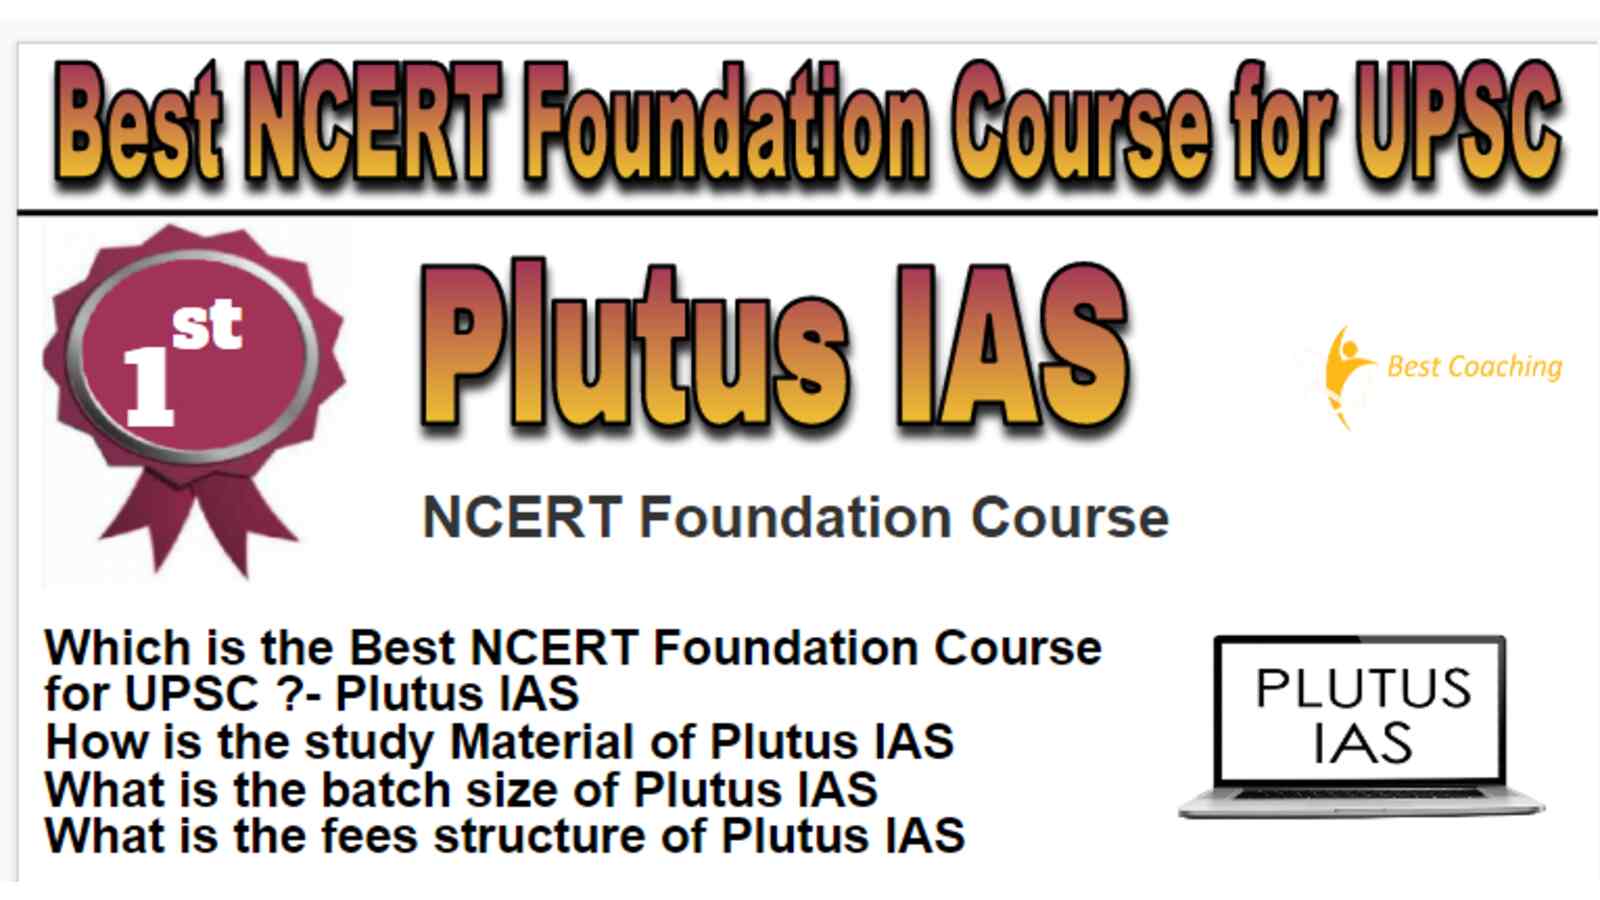 Rank 1 Best NCERT Foundation Course for UPSC 